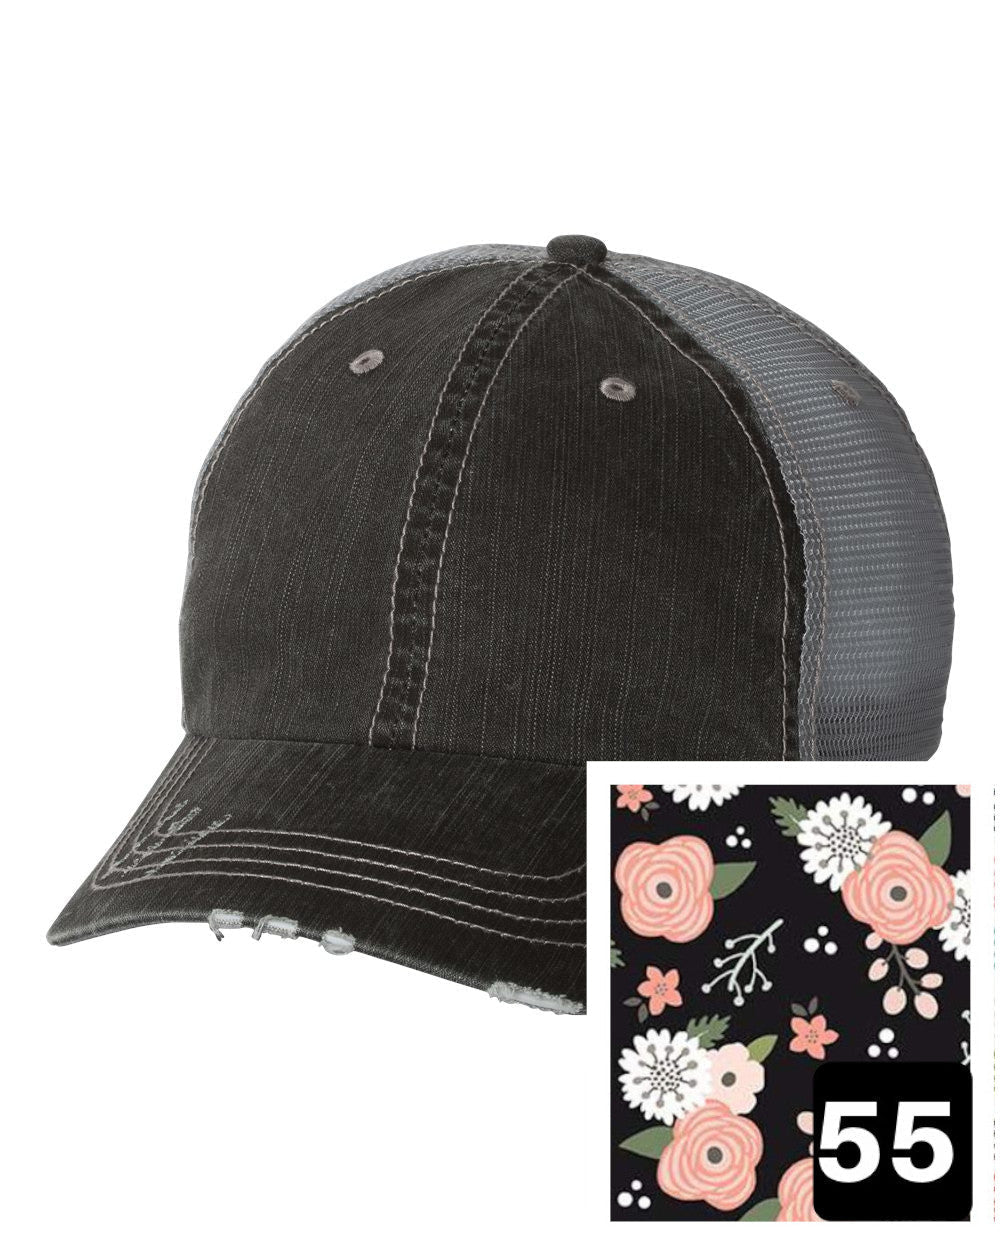 gray distressed trucker hat with petite floral on navy fabric state of Vermont